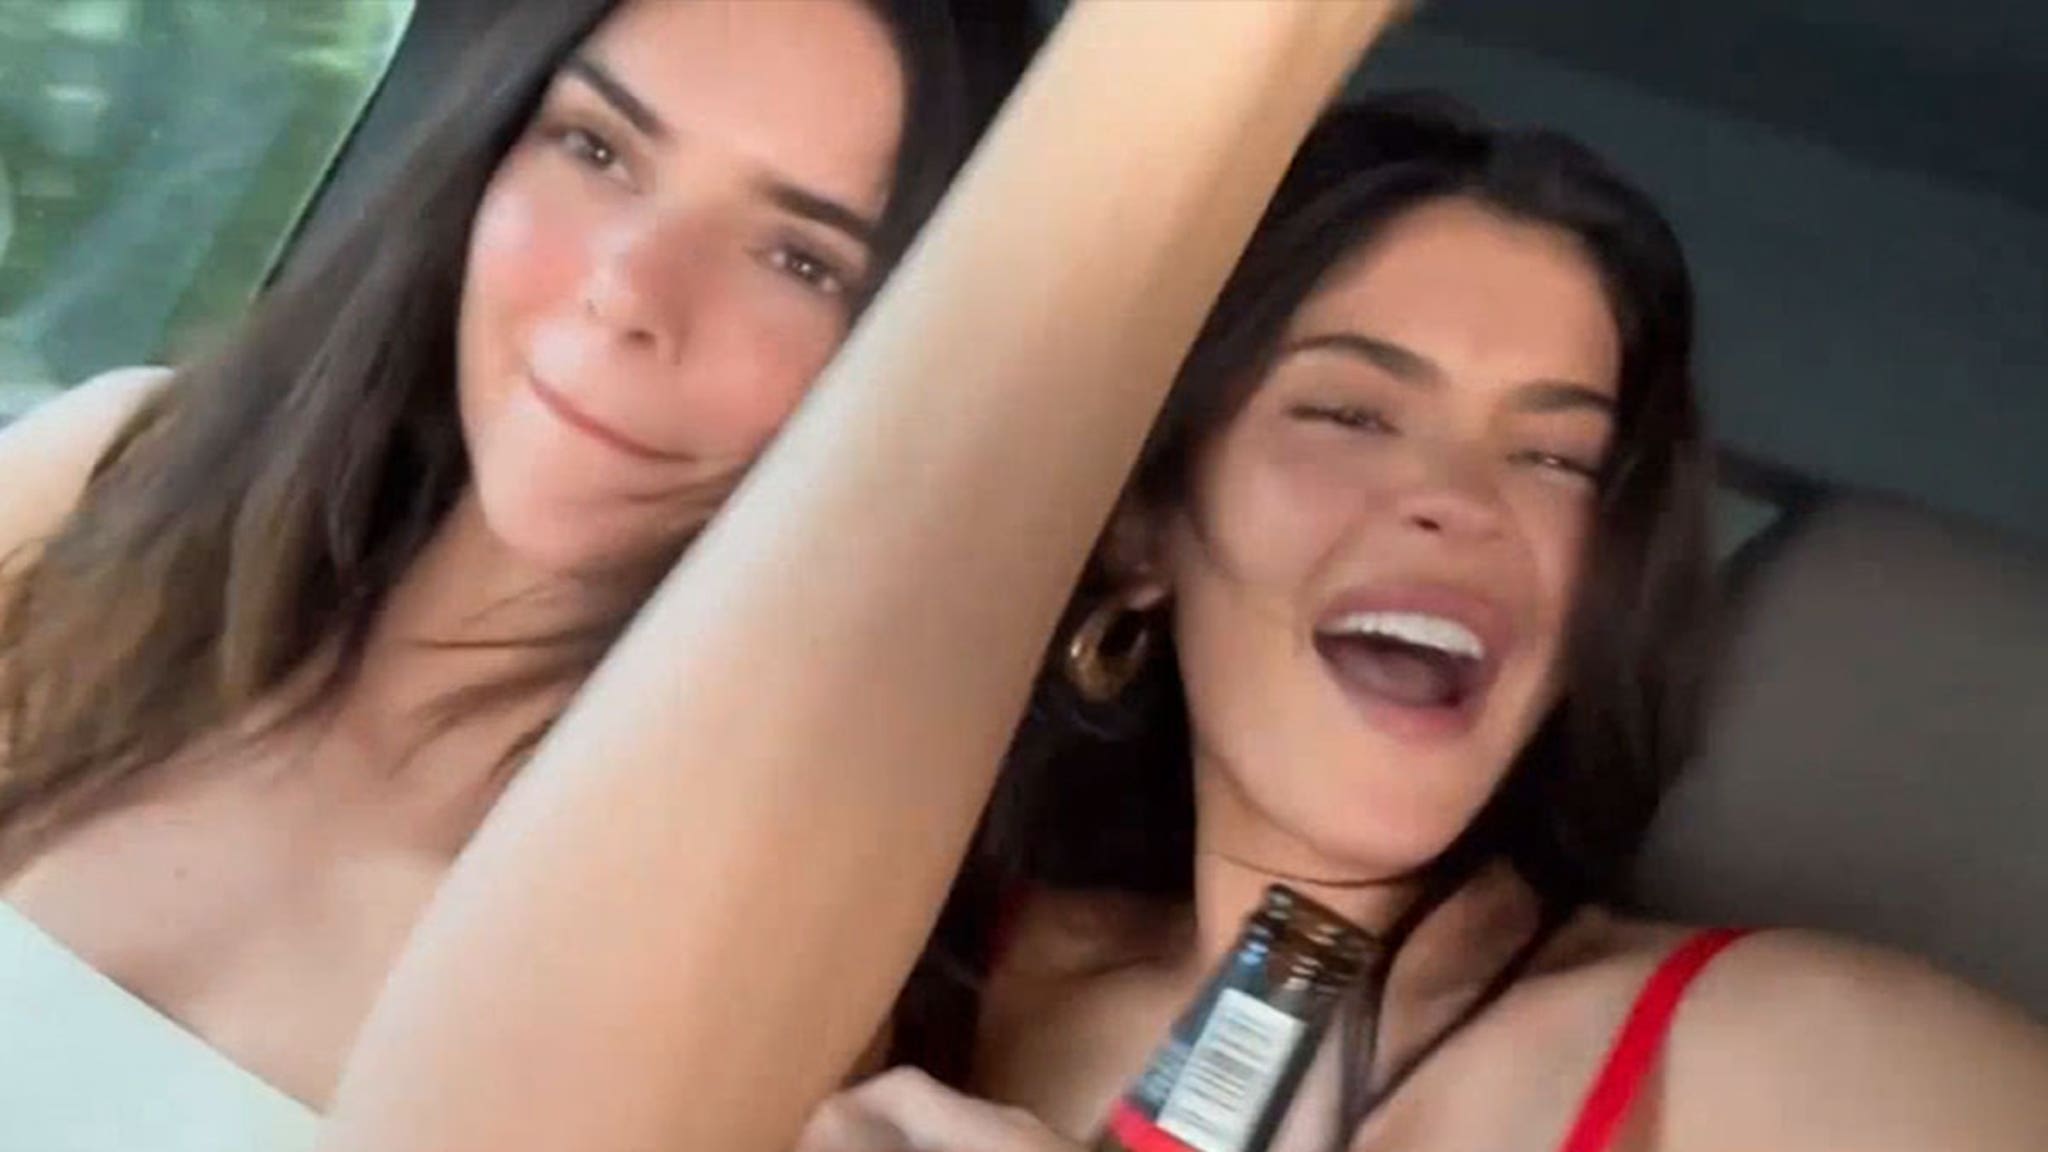 Kylie and Kendall Jenner sing Billie Eilish and drink beer together in the car